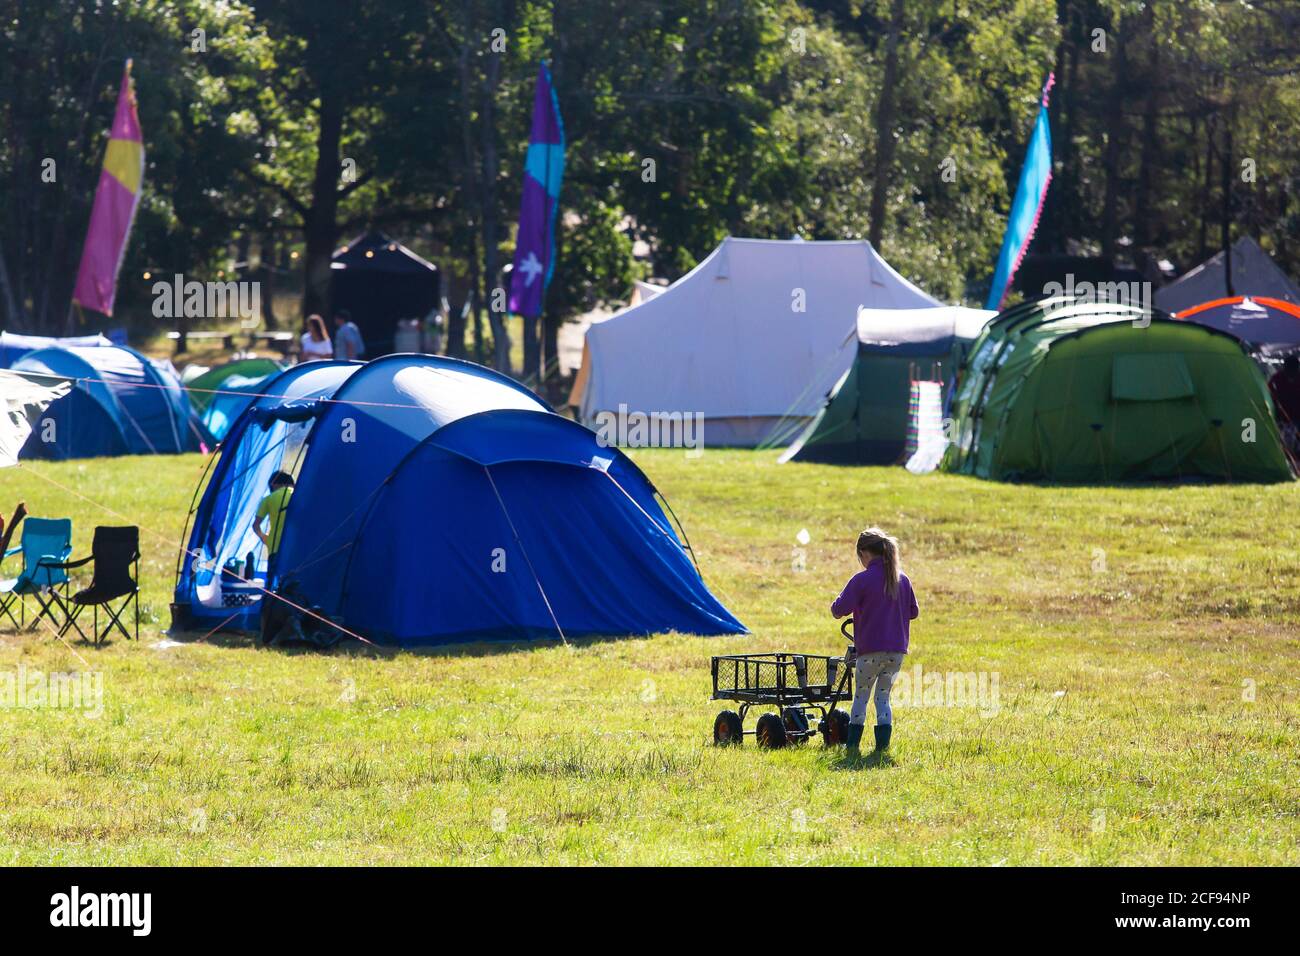 Campsite at We Are Not a Festival socially distanced event in Pippingford Park - camping with a festival vibe Stock Photo